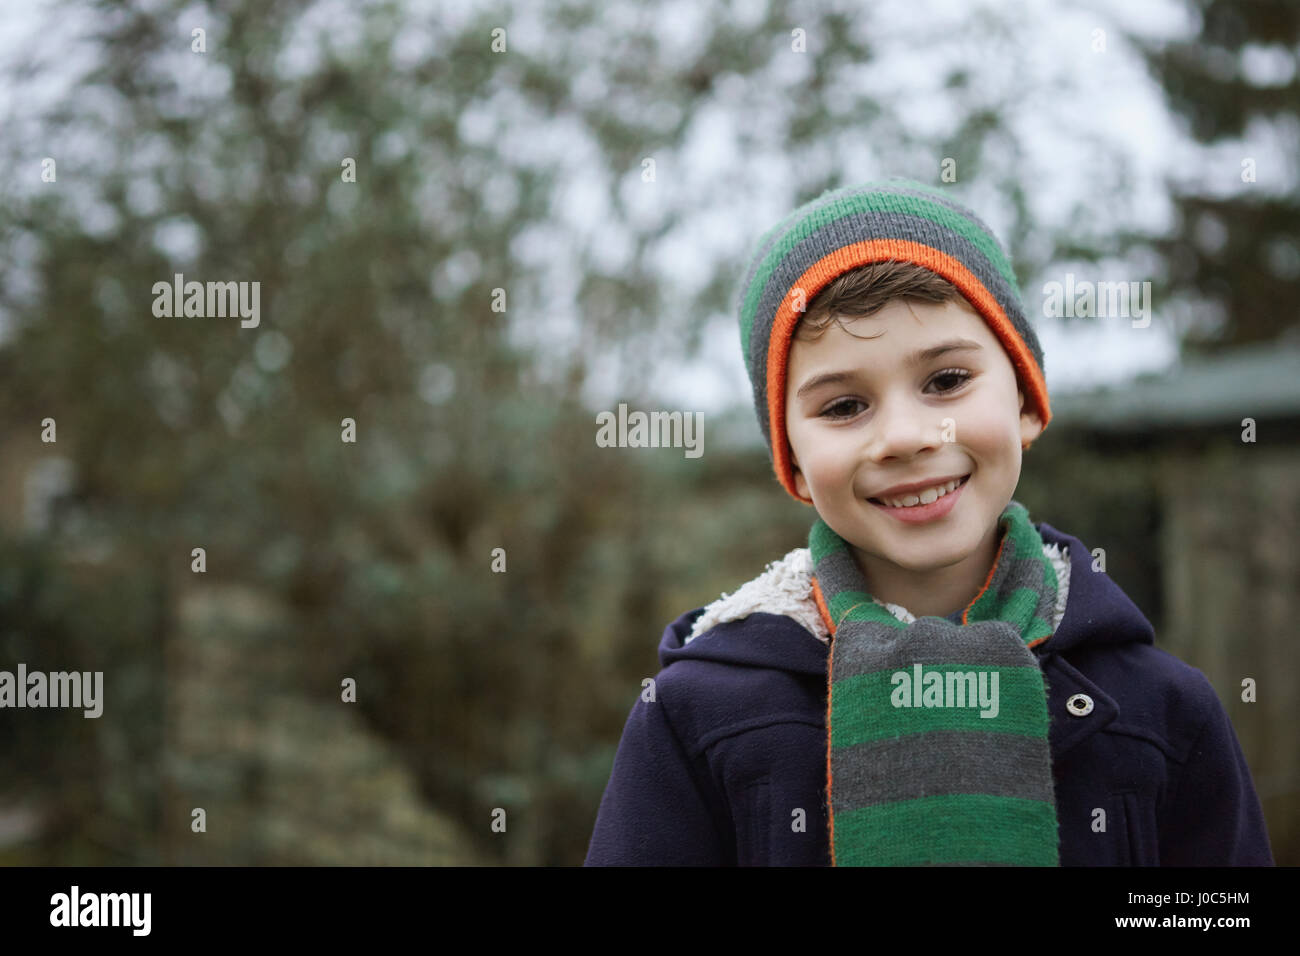 Portrait of boy in knit hat outdoors Stock Photo